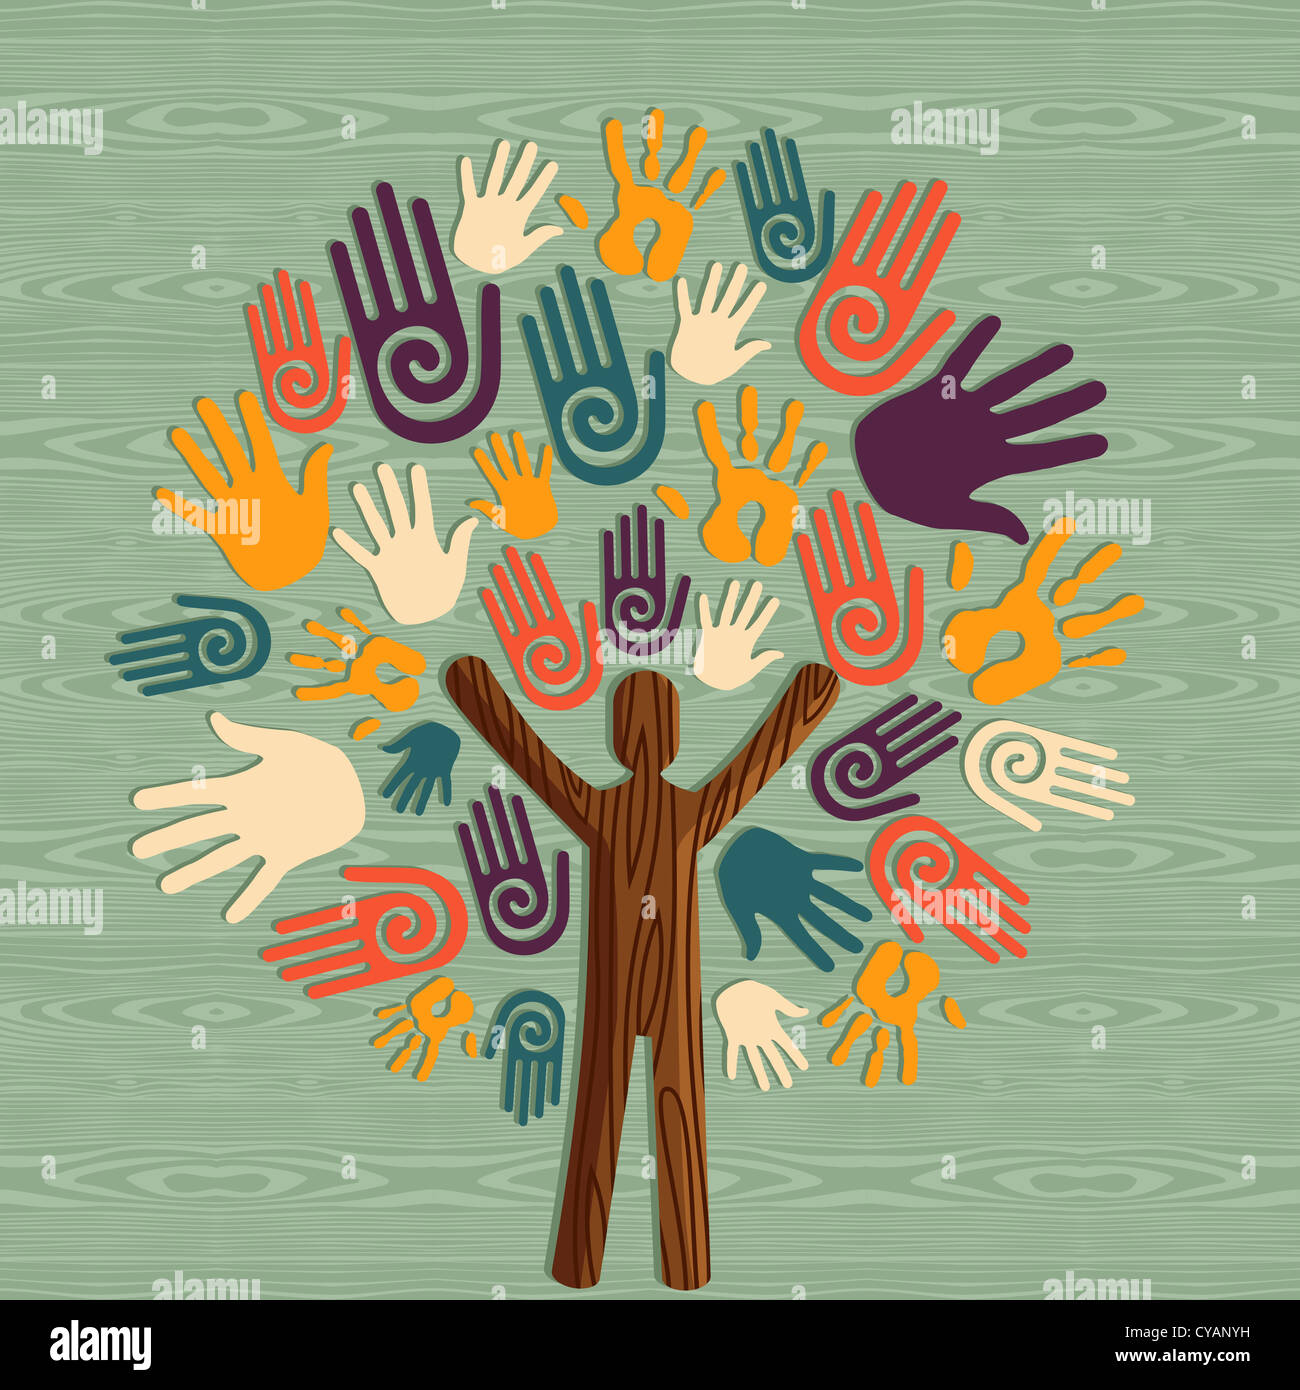 Global diversity man as trunk tree hands illustration. Vector file layered for easy manipulation and custom coloring. Stock Photo